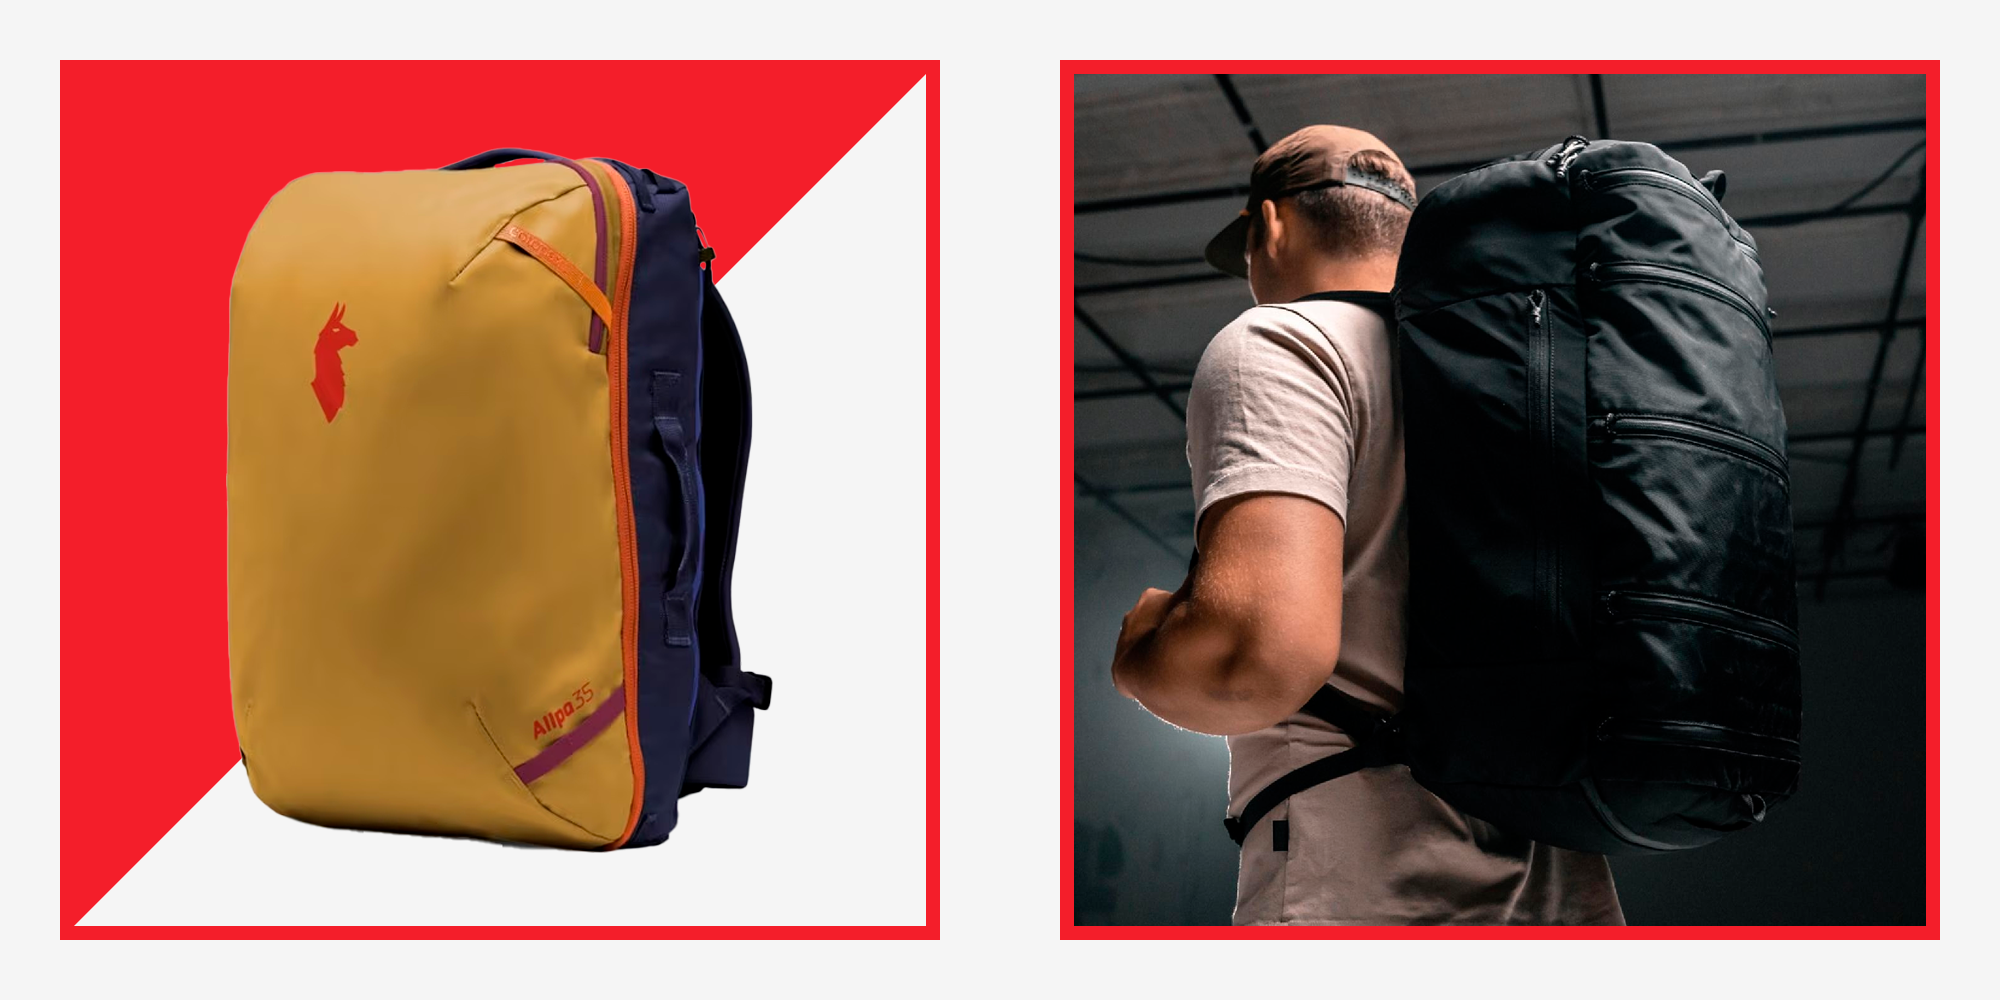 <p>One smart way of guaranteeing stress-free travel is by using a travel <a href="https://www.menshealth.com/style/a19530825/cool-backpacks-for-men/">backpack</a>. It's what the travel experts recommend, and it's also what your Aunt who travels for work recommends (she has more airline miles than anyone in the family combined, you know). Traveling light often means going <a href="https://www.menshealth.com/style/g19539437/best-carry-on-luggage/">carry-on</a> only, but traveling the leanest way possible usually involves just a travel backpack, also known as a carry-on backpack. </p><p>Travel backpacks are a versatile, easy-to-carry <a href="https://www.menshealth.com/technology-gear/a36111119/best-luggage-brands/">luggage</a> pick if you're trying to pack as smart and fast as possible. A travel backpack is also a great choice if you want to bring a bag with you on the plane (instead of a formal carry-on suitcase) to go with a checked piece of luggage. Unlike a regular backpack, a good travel backpack is going to offer a little more size and space (usually between 30 to 40 liters). Most travel backpacks are made to hold at least a few outfits, plus all your electronics and <a href="https://www.menshealth.com/technology-gear/g42487333/best-travel-gadgets/">travel gadgets</a>. The generous space helps carry an entire weekend's (or week's) worth of clothes. It can also hold all your flight essentials: your <a href="https://www.menshealth.com/style/g19540451/comfortable-hoodies-for-men/">hoodie</a>, plane shoes (great for long flights), <a href="https://www.menshealth.com/technology-gear/g40314197/best-travel-pillows/">travel pillow</a>, <a href="https://www.menshealth.com/technology-gear/g42780370/best-over-ear-headphones/">headphones</a>, and more. </p><p>If you believe you can only carry a significant amount of belongings via a roller bag or <a href="https://www.menshealth.com/style/g33253730/best-duffel-bags-for-men/">duffel bag</a>, think again. All of our travel backpack picks below offer optimized storage with comfortable straps and friendly designs that make navigating your environments that much easier. Ready to see what's out there? Let's dive into the best travel backpacks worth buying in 2024.</p><p><strong><a href="https://www.menshealth.com/technology-gear/g43297684/best-luggage-on-amazon/">Best Luggage Brands on Amazon</a> | <a href="https://www.menshealth.com/technology-gear/g42245418/best-luggage-trackers/">Best Luggage Trackers</a> | <strong><a href="https://www.menshealth.com/technology-gear/g40940884/best-airtag-wallet/">Best AirTag Wallets</a> | <a href="https://www.menshealth.com/style/g39753225/best-sling-bags-for-men/">Best Sling Bags</a></strong></strong></p>